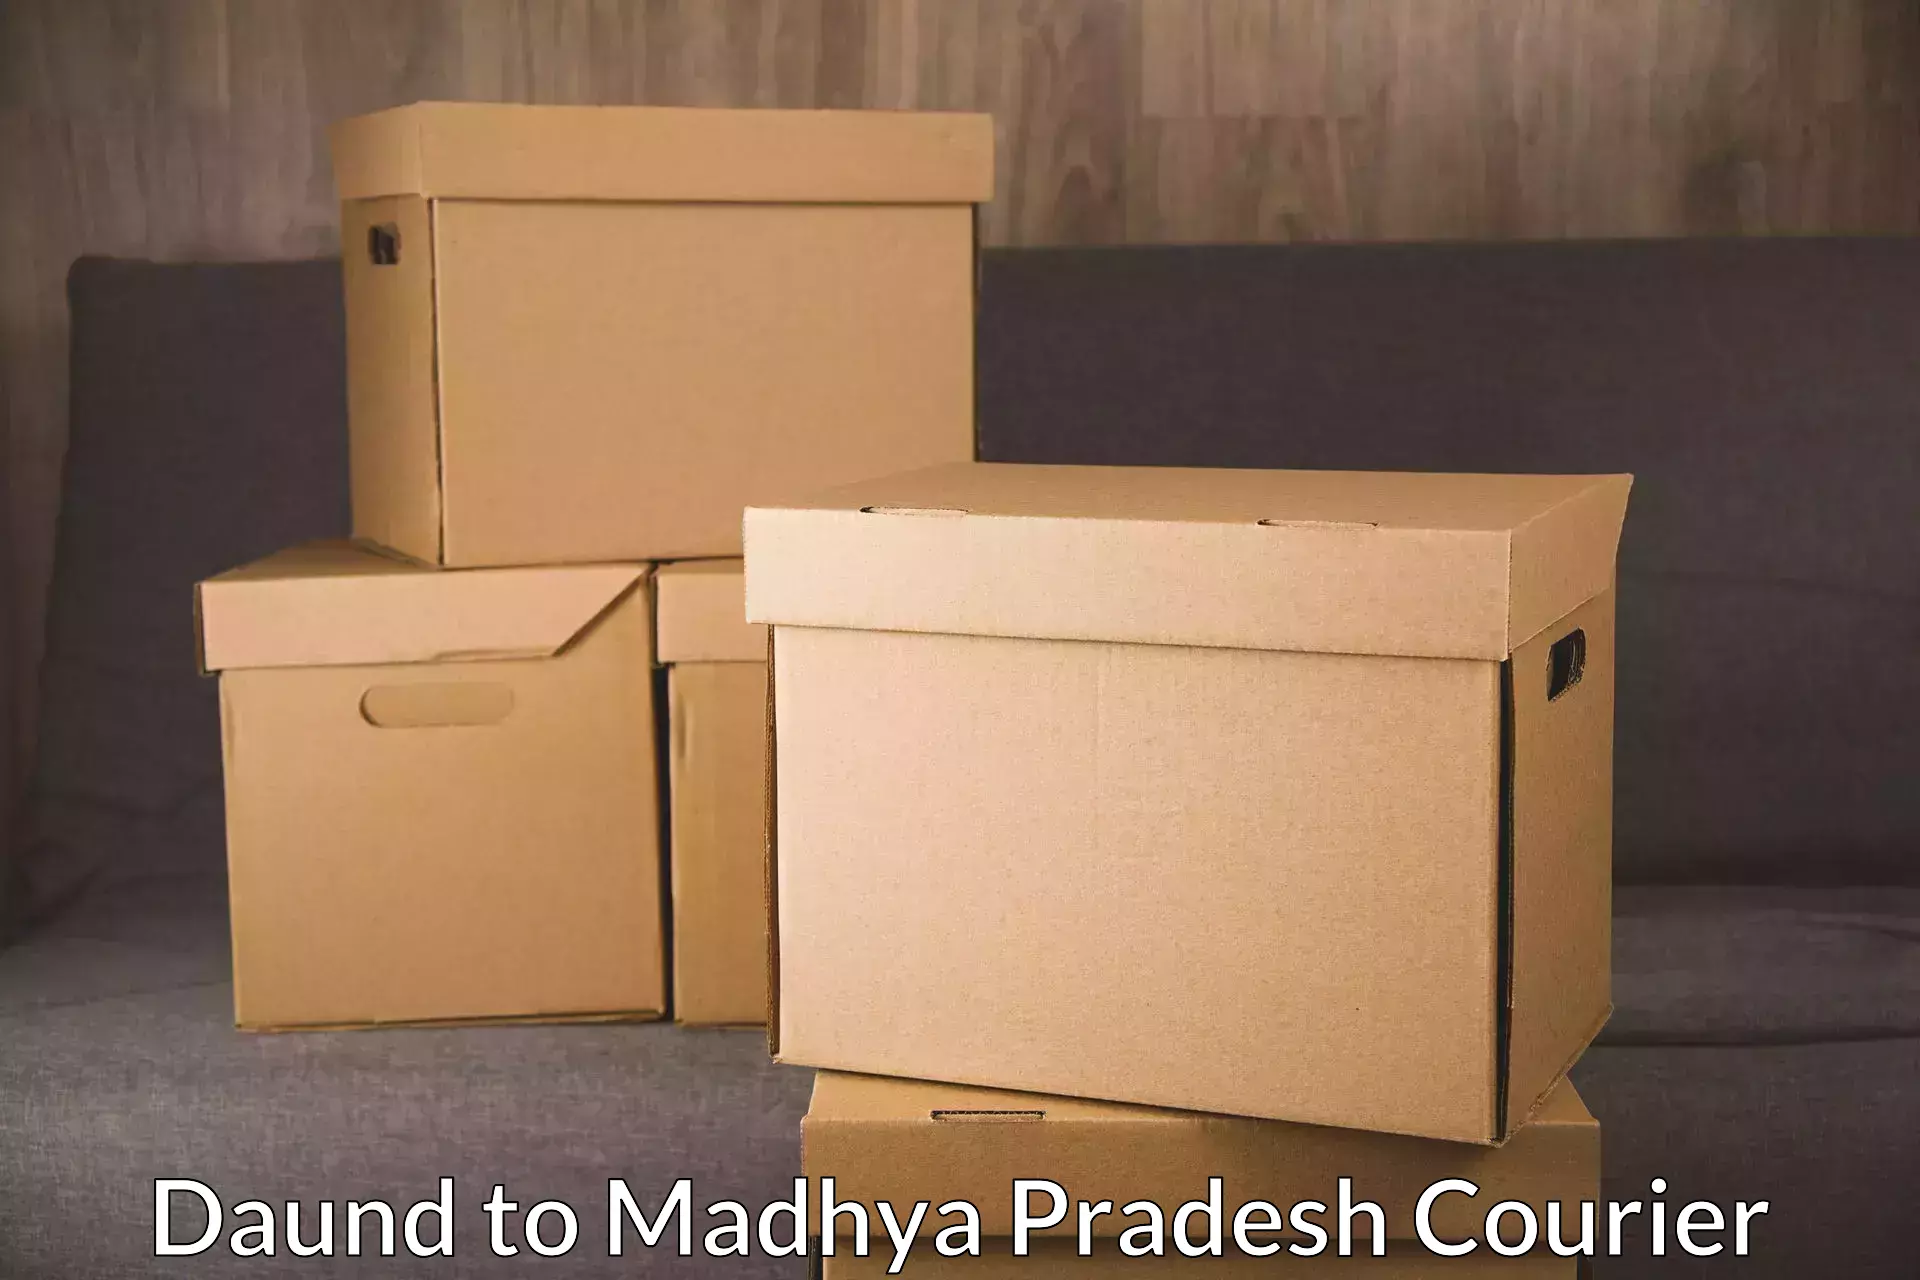 On-call courier service Daund to Chanderi